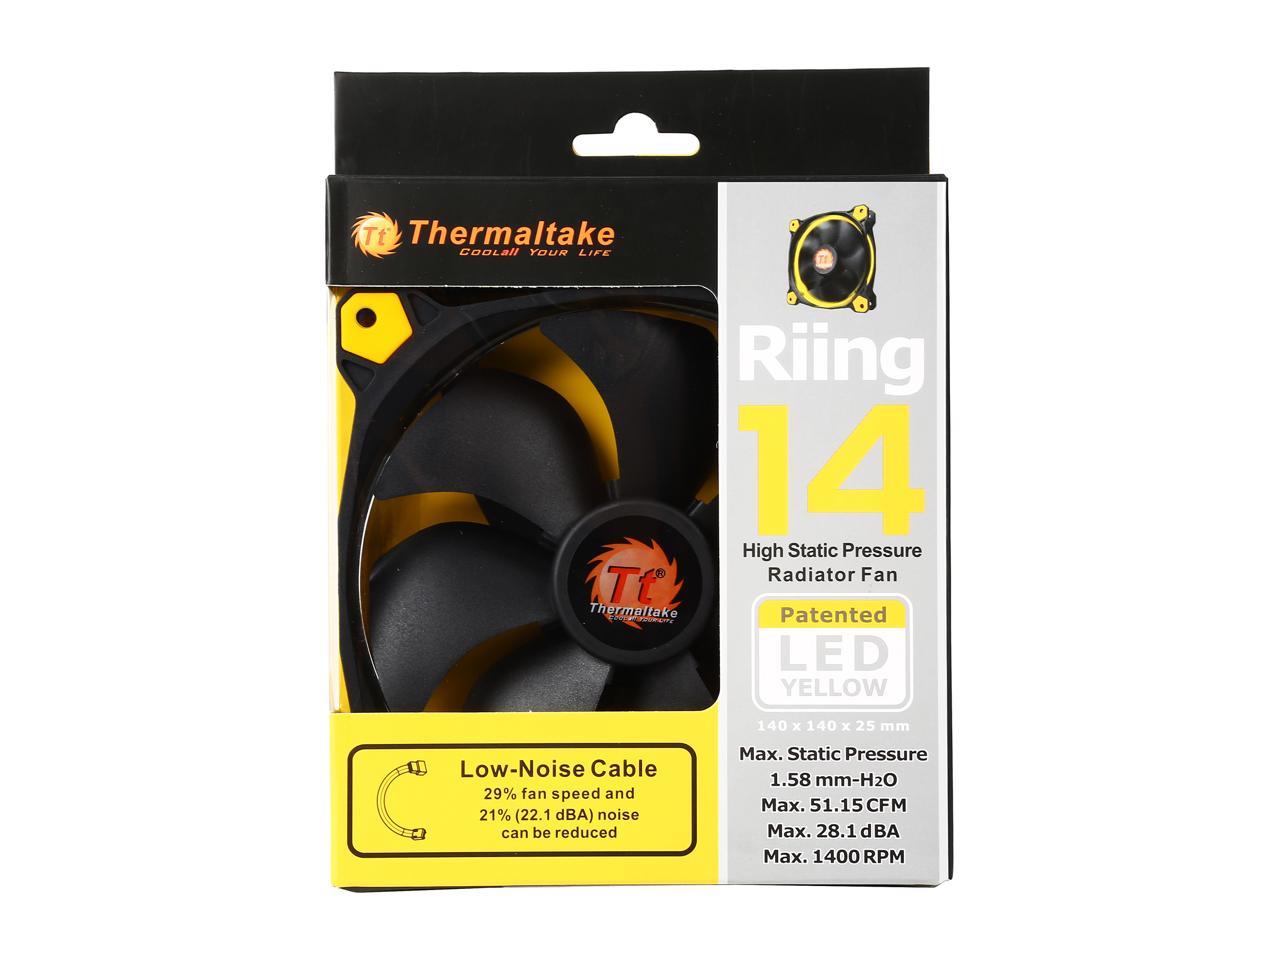 Thermaltake Riing 14 Series High Static Pressure 140Mm Circular Yellow Led Ring Case/Radiator Fan Cl-F039-Pl14Yl-A